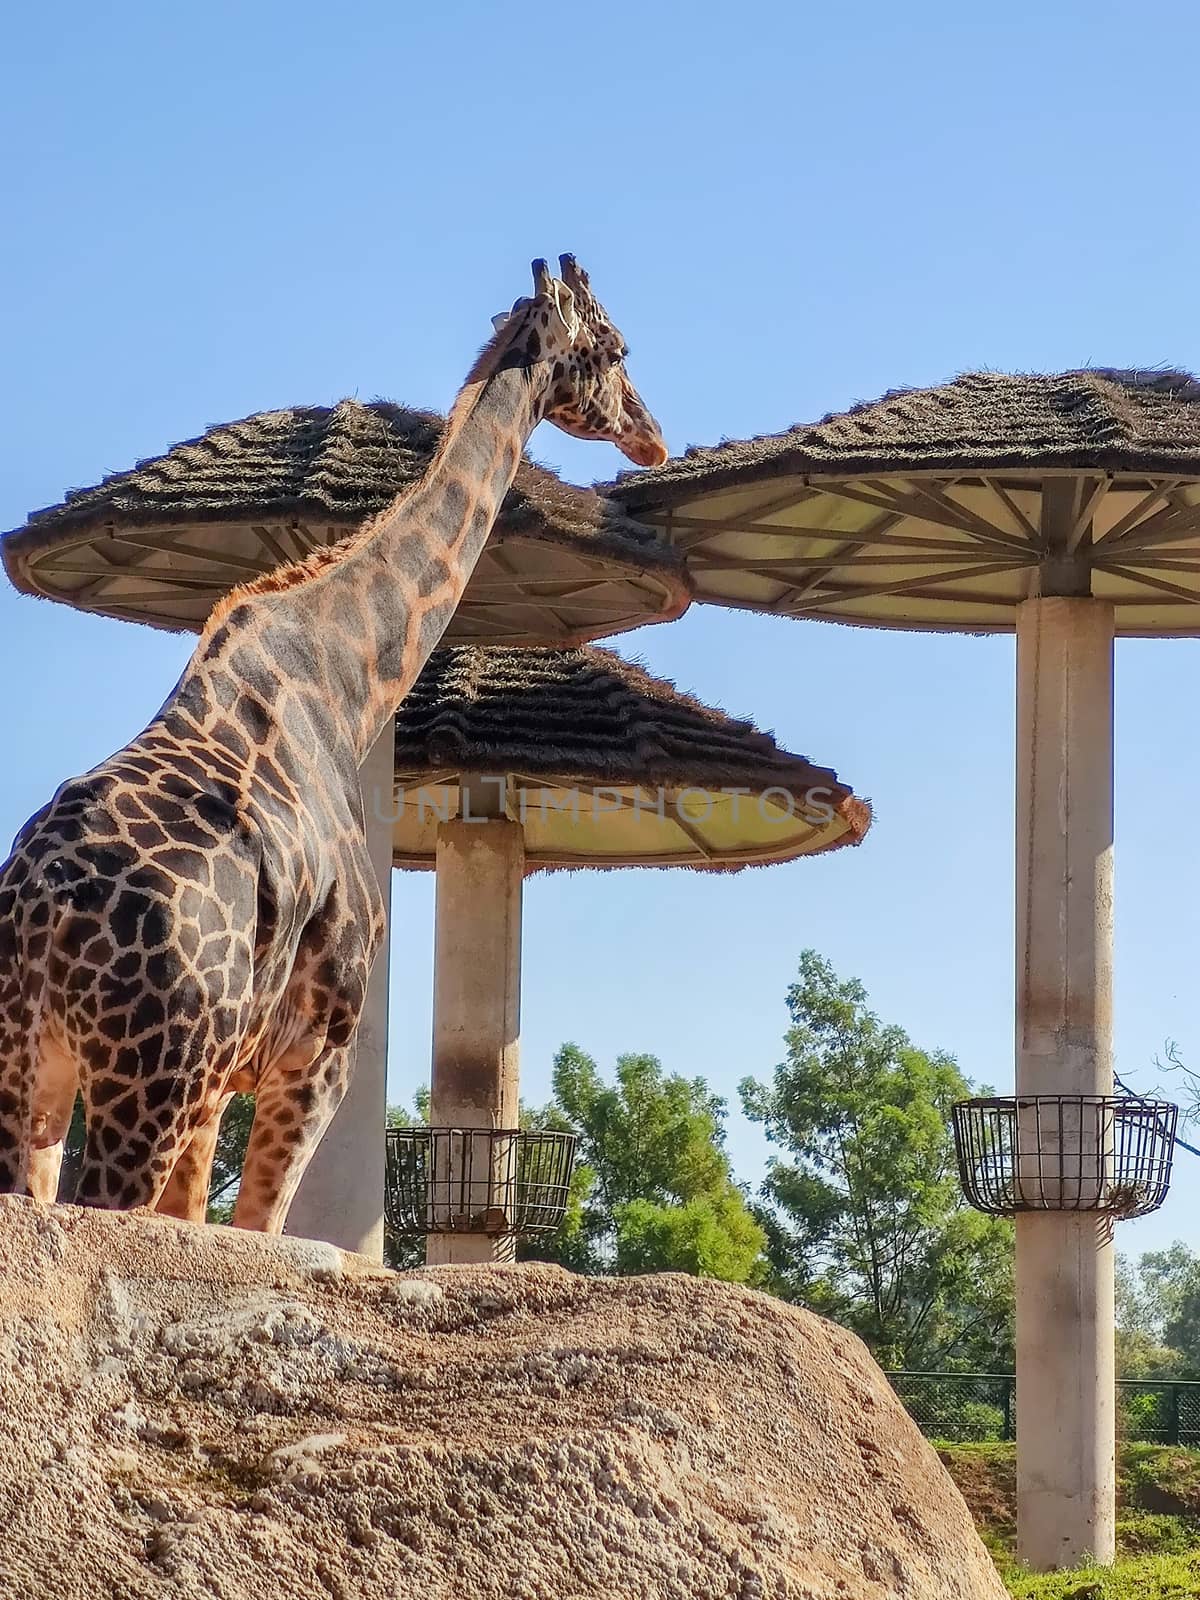 a large giraffe looking to something in the zoo